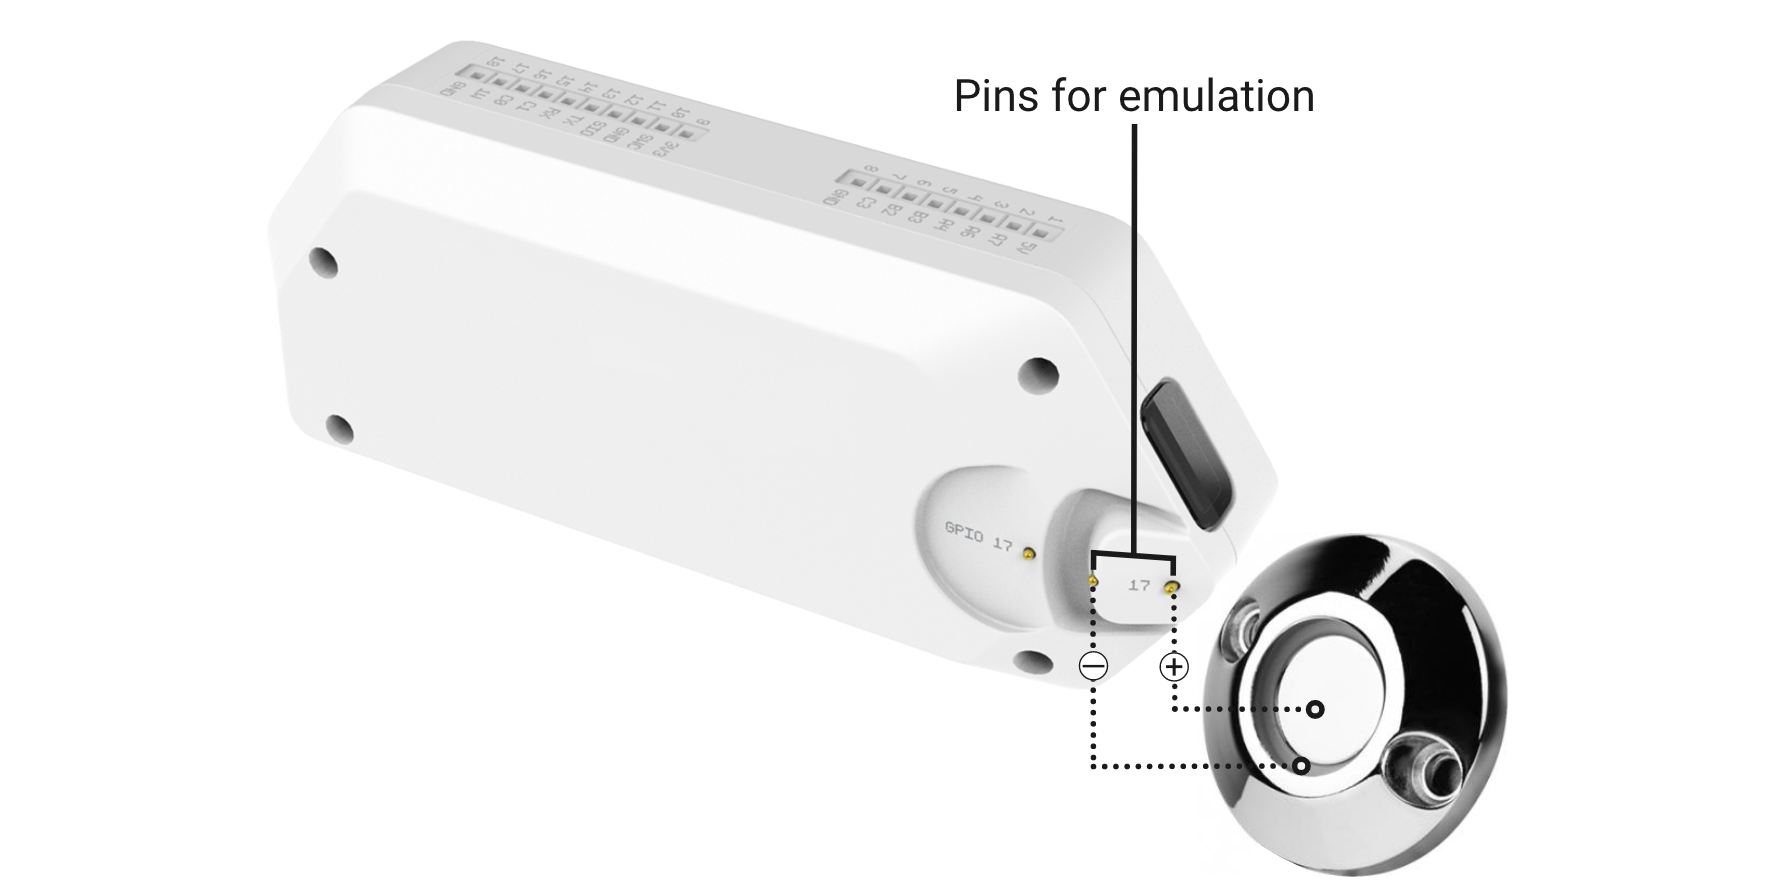 Pins used for emulation